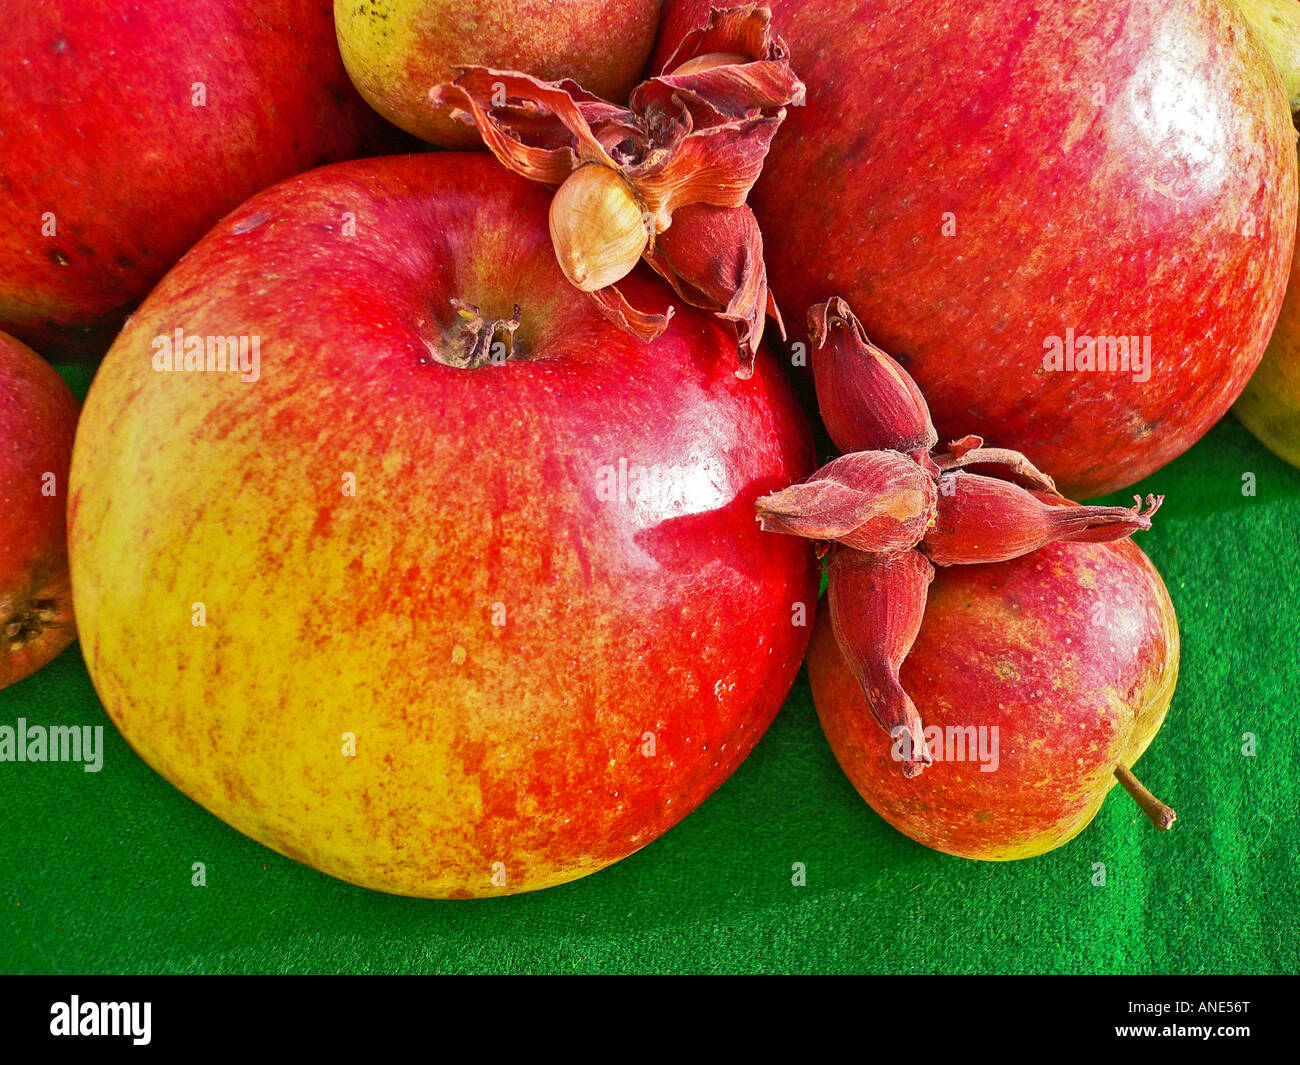 Apples and nuts grown organically shown just after harvest Stock Photo